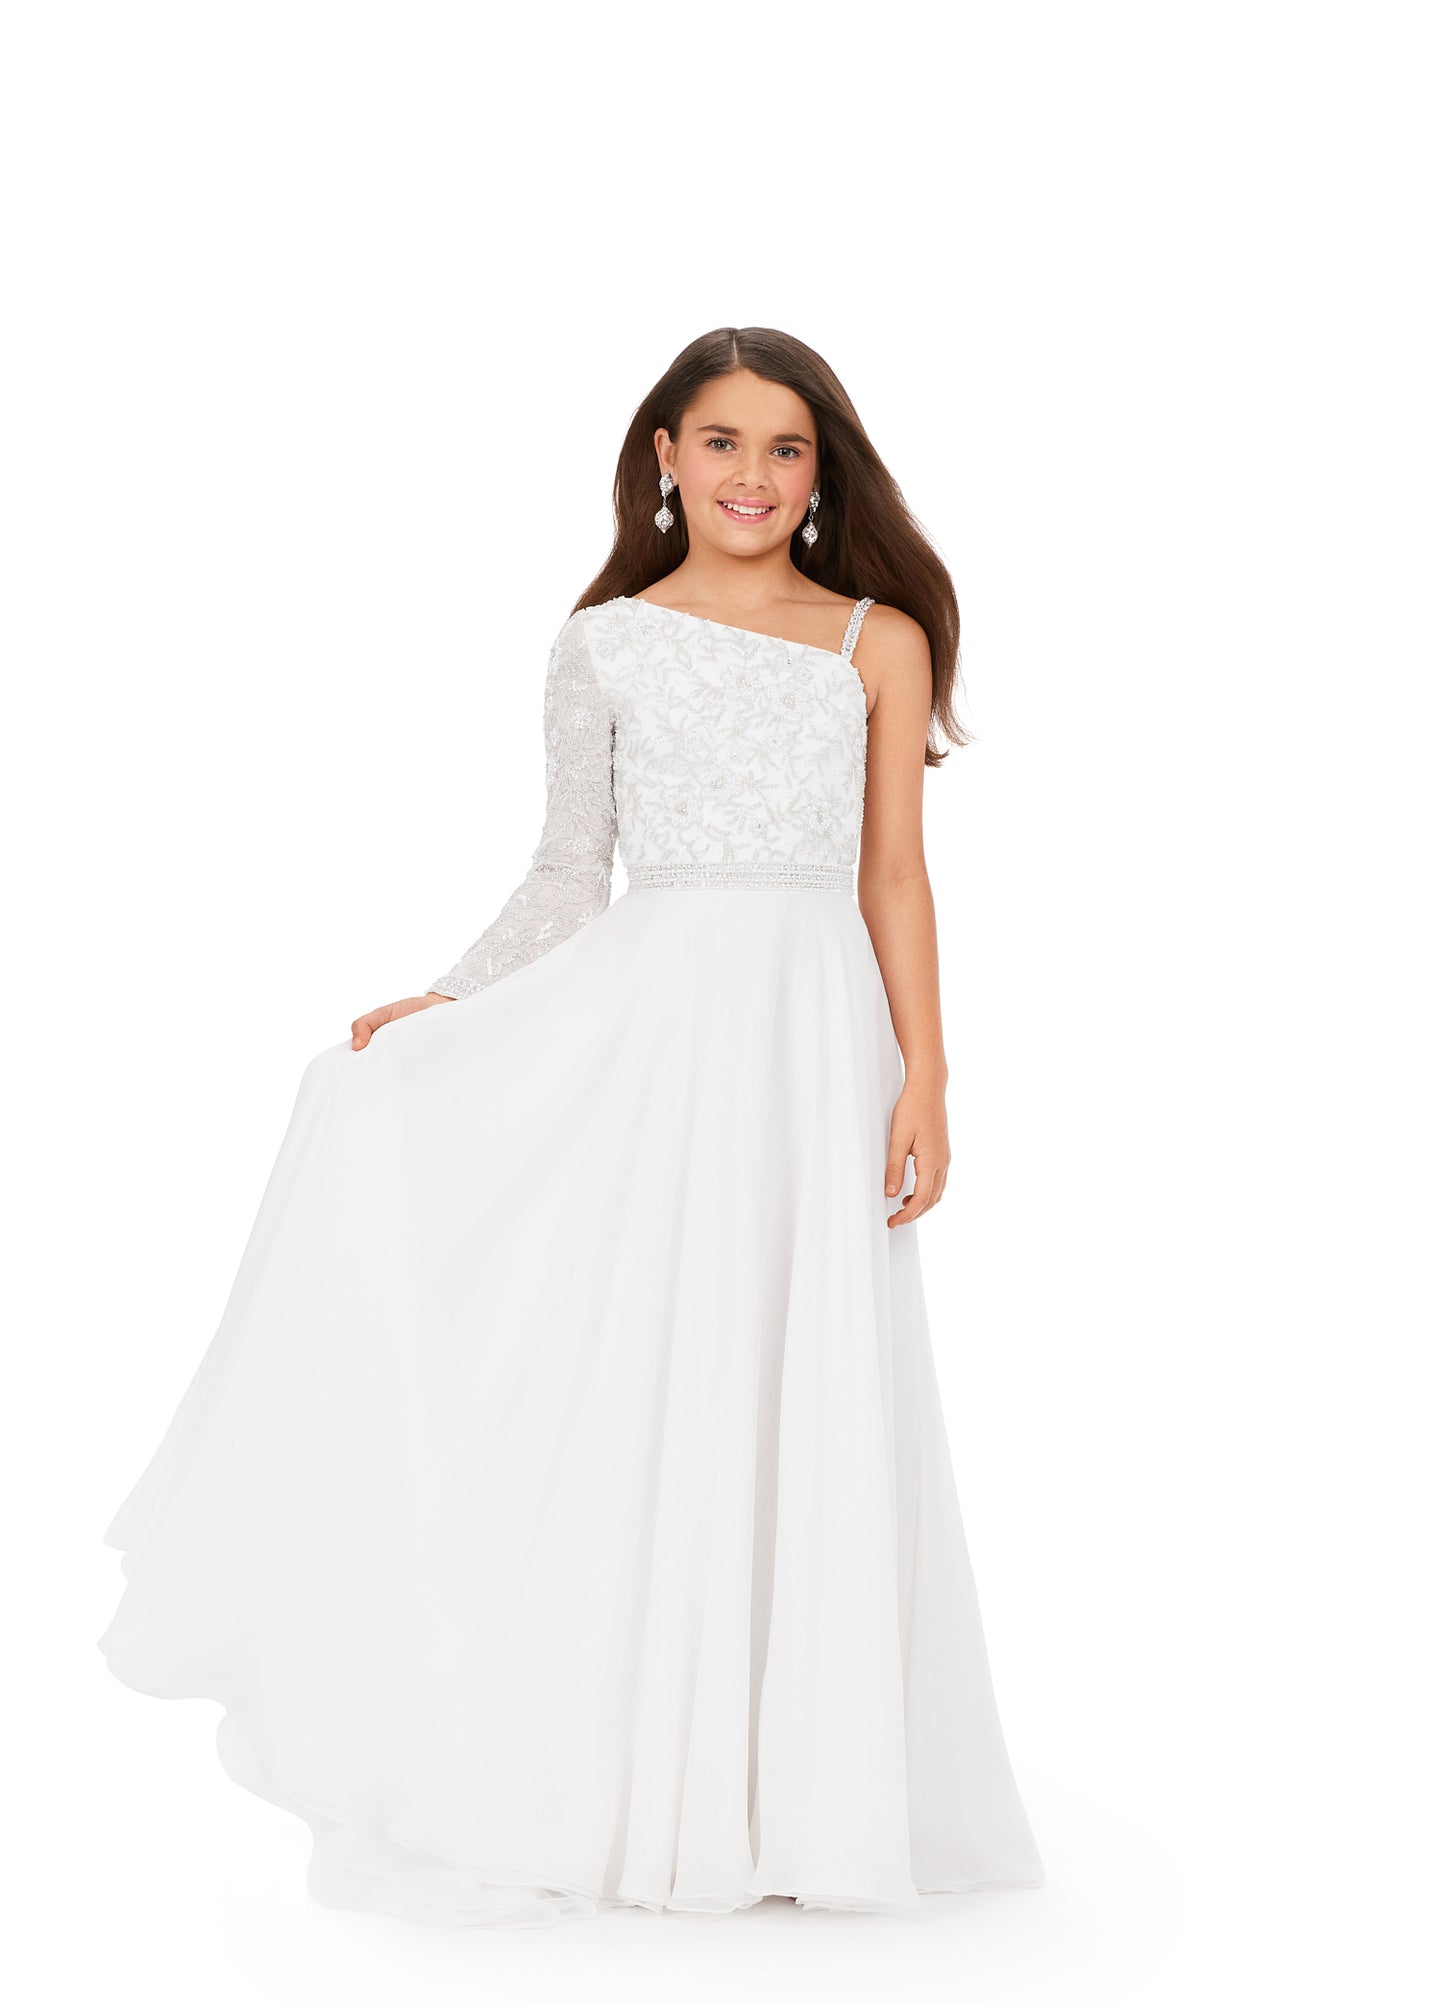 Ashley Lauren Kids 8197 One Shoulder Fully Beaded Bodice A-Line Chiffon Skirt Gown. Make all your dreams come true in this stunning one shoulder gown. With gorgeous beaded details throughout the top and a chiffon skirt, this dress is sure to WOW the crowd!